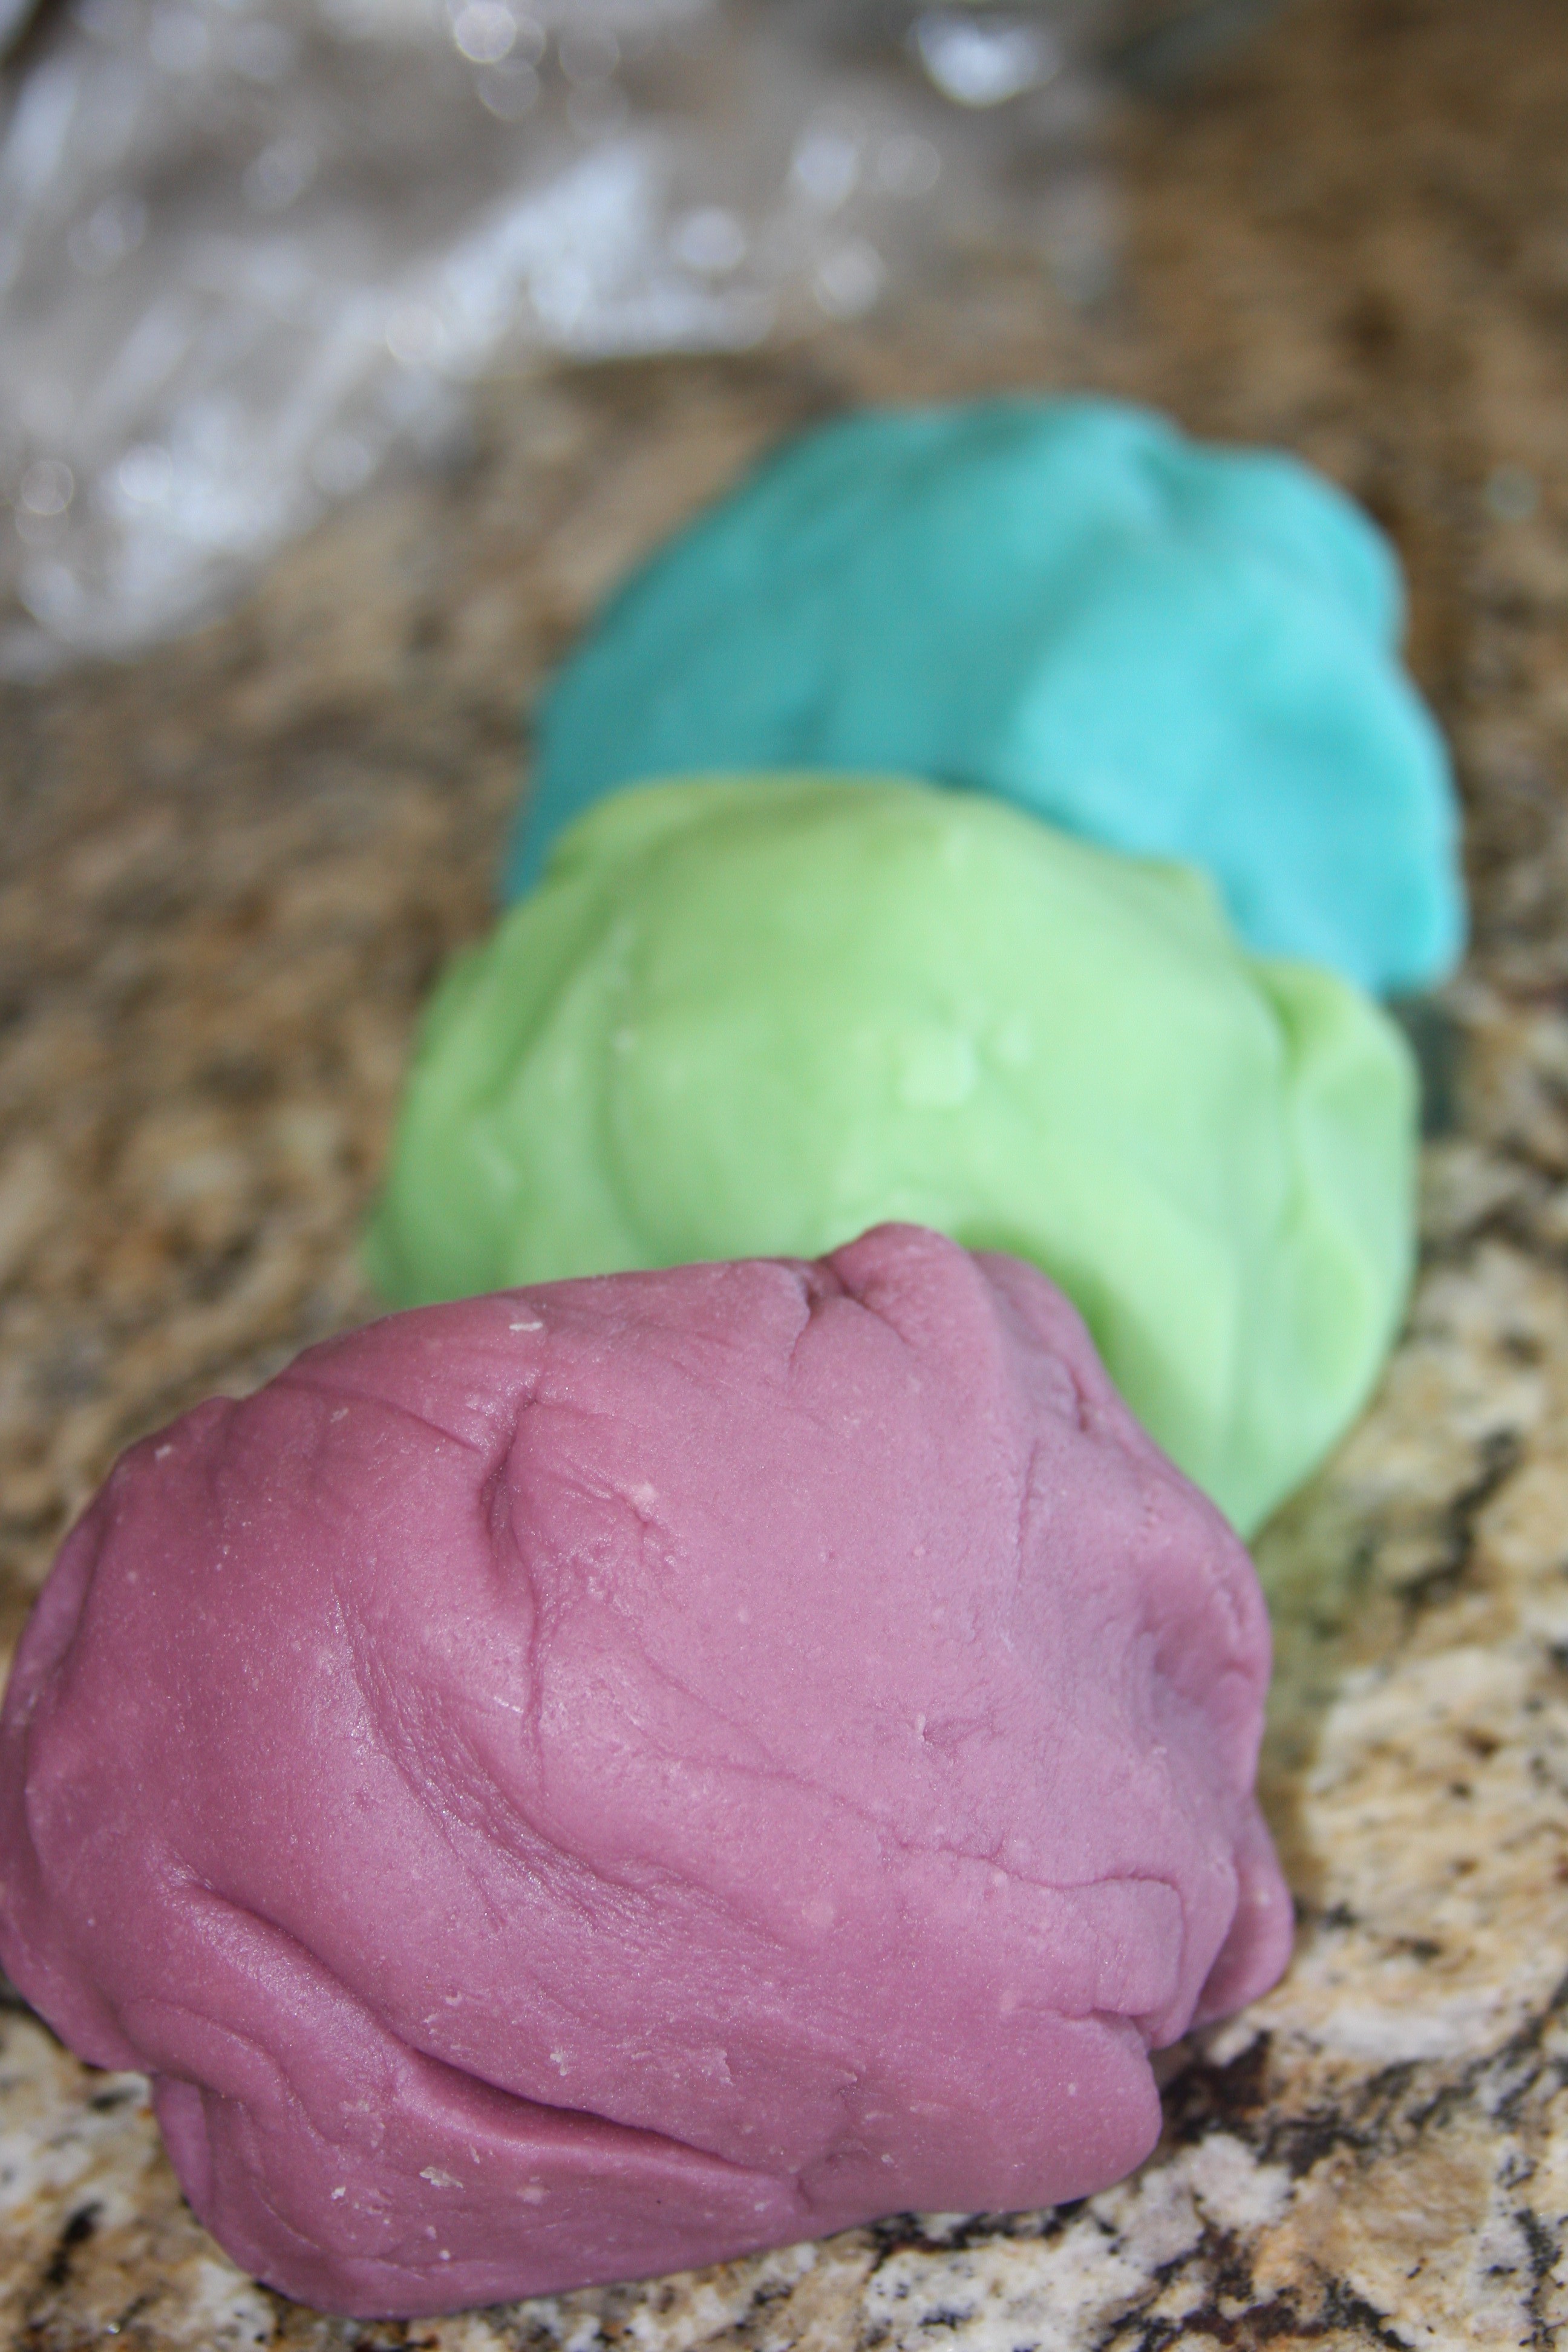 Something for a rainy day: my favorite play-dough recipe